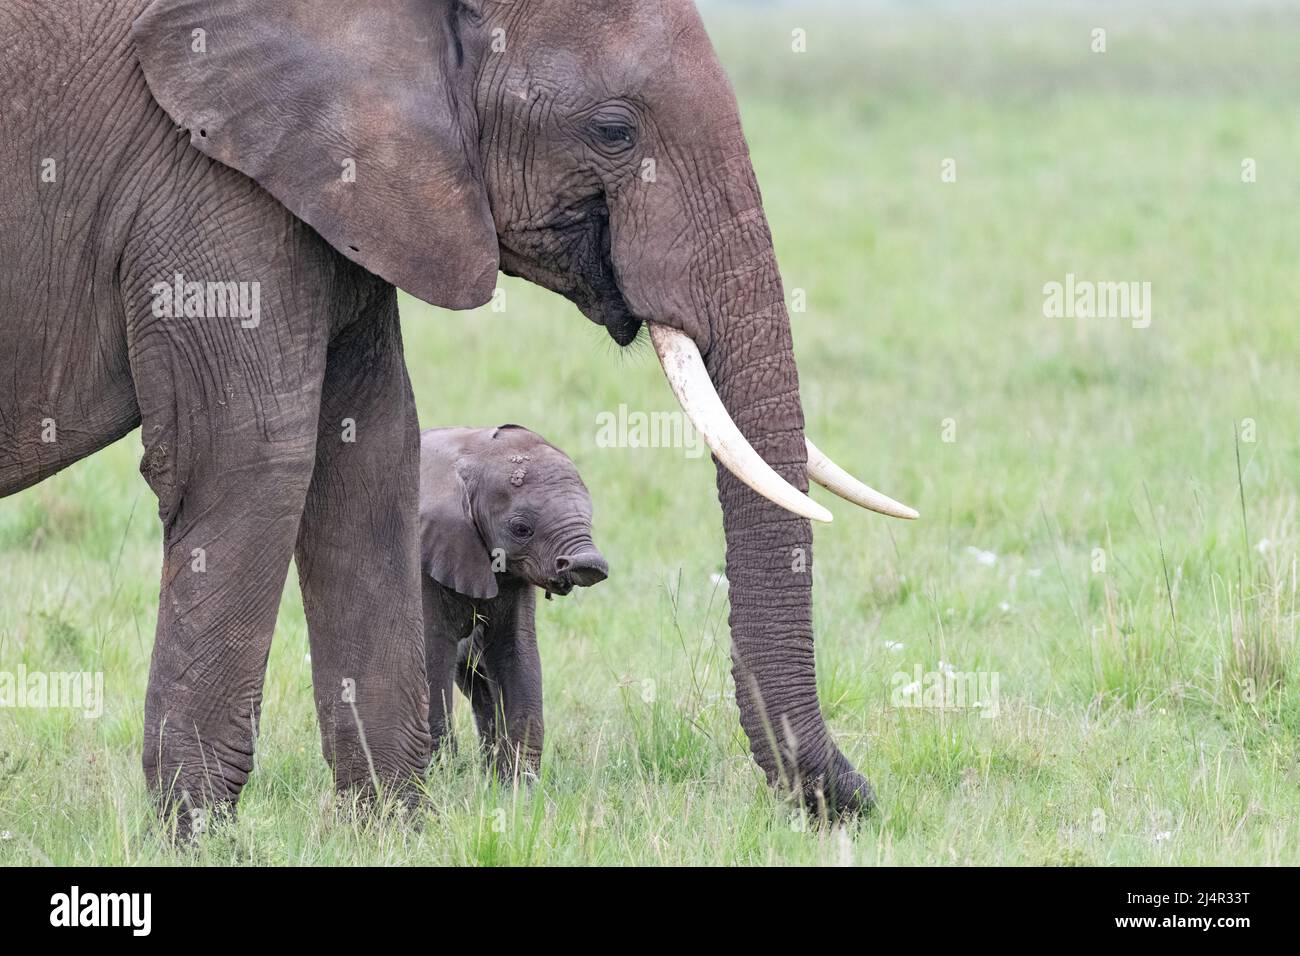 baby elephant and its mother Stock Photo